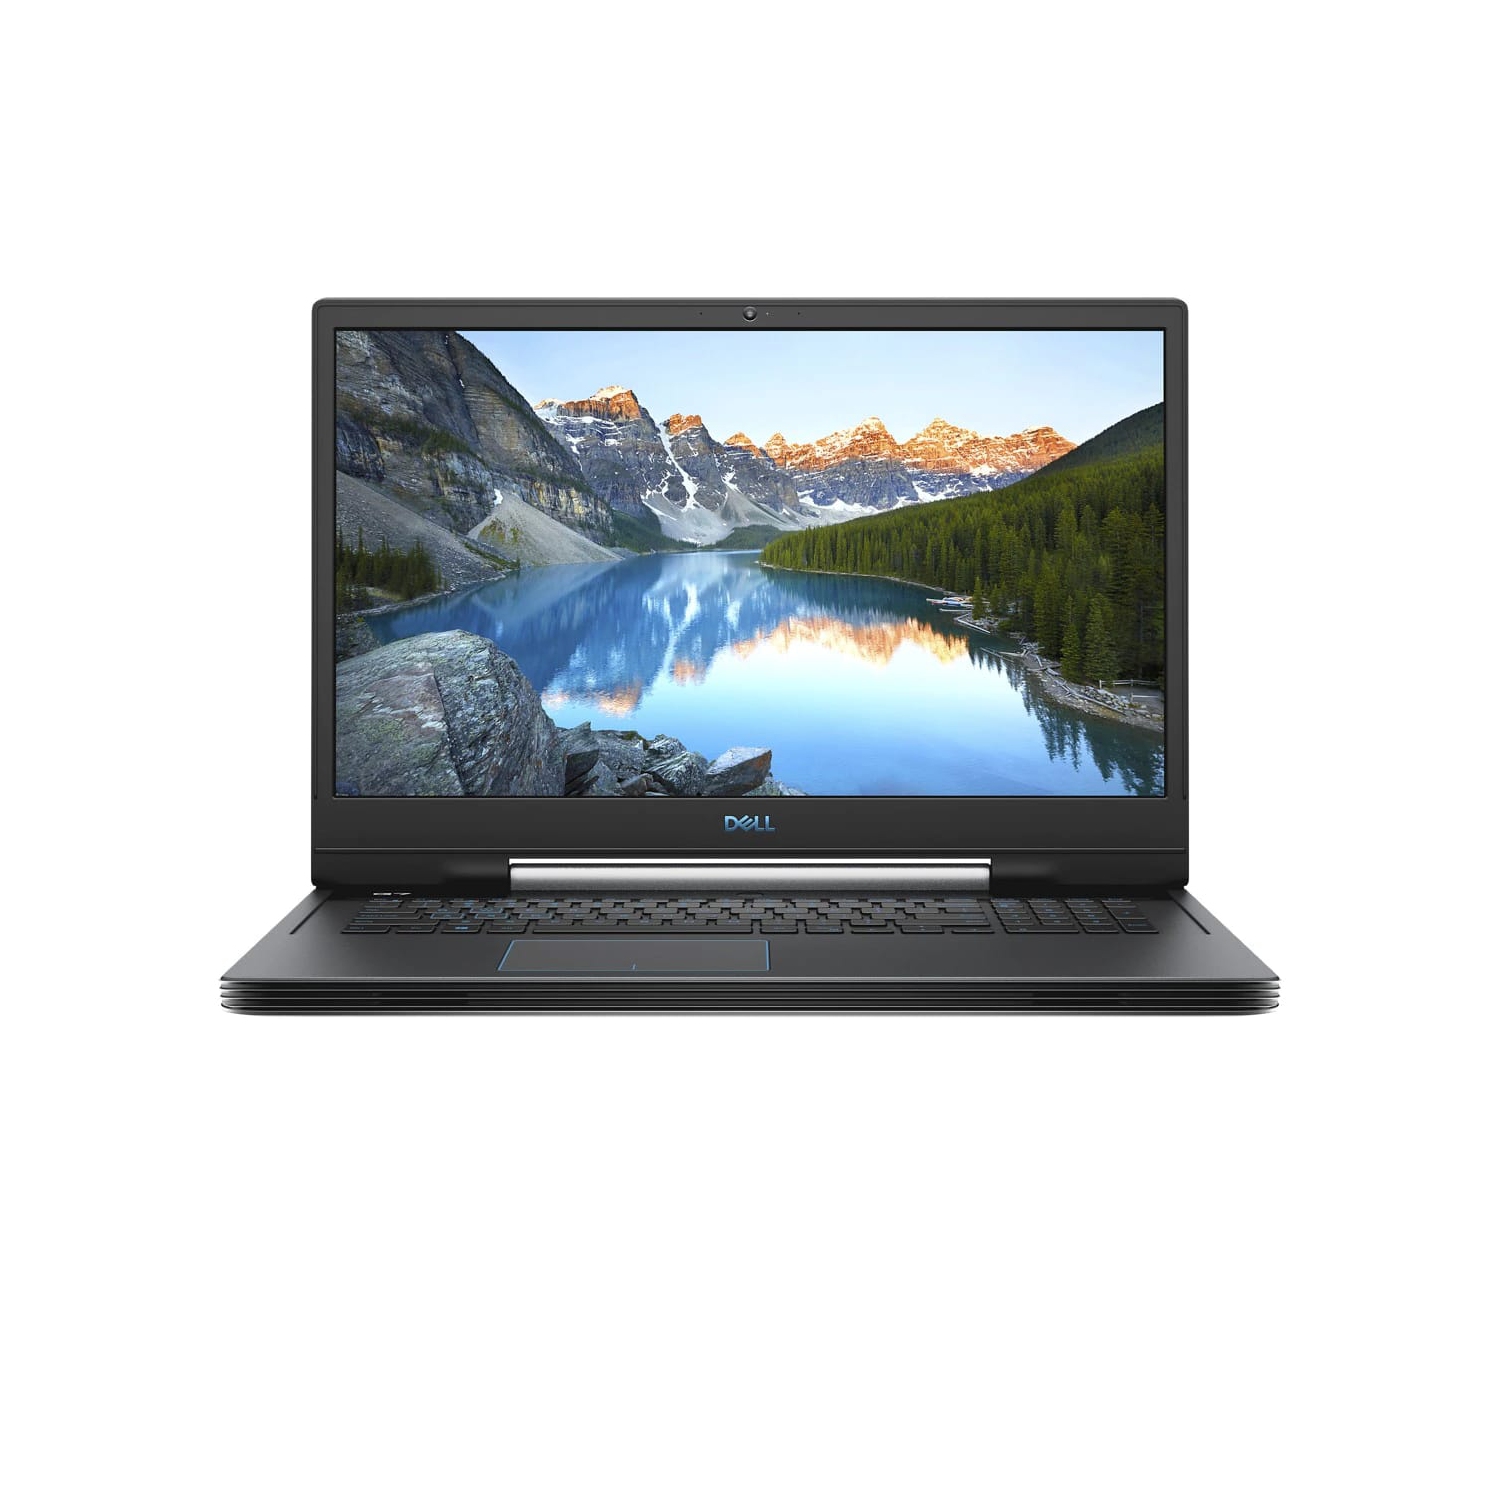 Refurbished (Excellent) – Dell G7 7790 Gaming Laptop (2019) | 17.3" FHD | Core i7 - 512GB SSD - 16GB RAM - RTX 2070 | 6 Cores @ 4.1 GHz - 8GB GDDR6